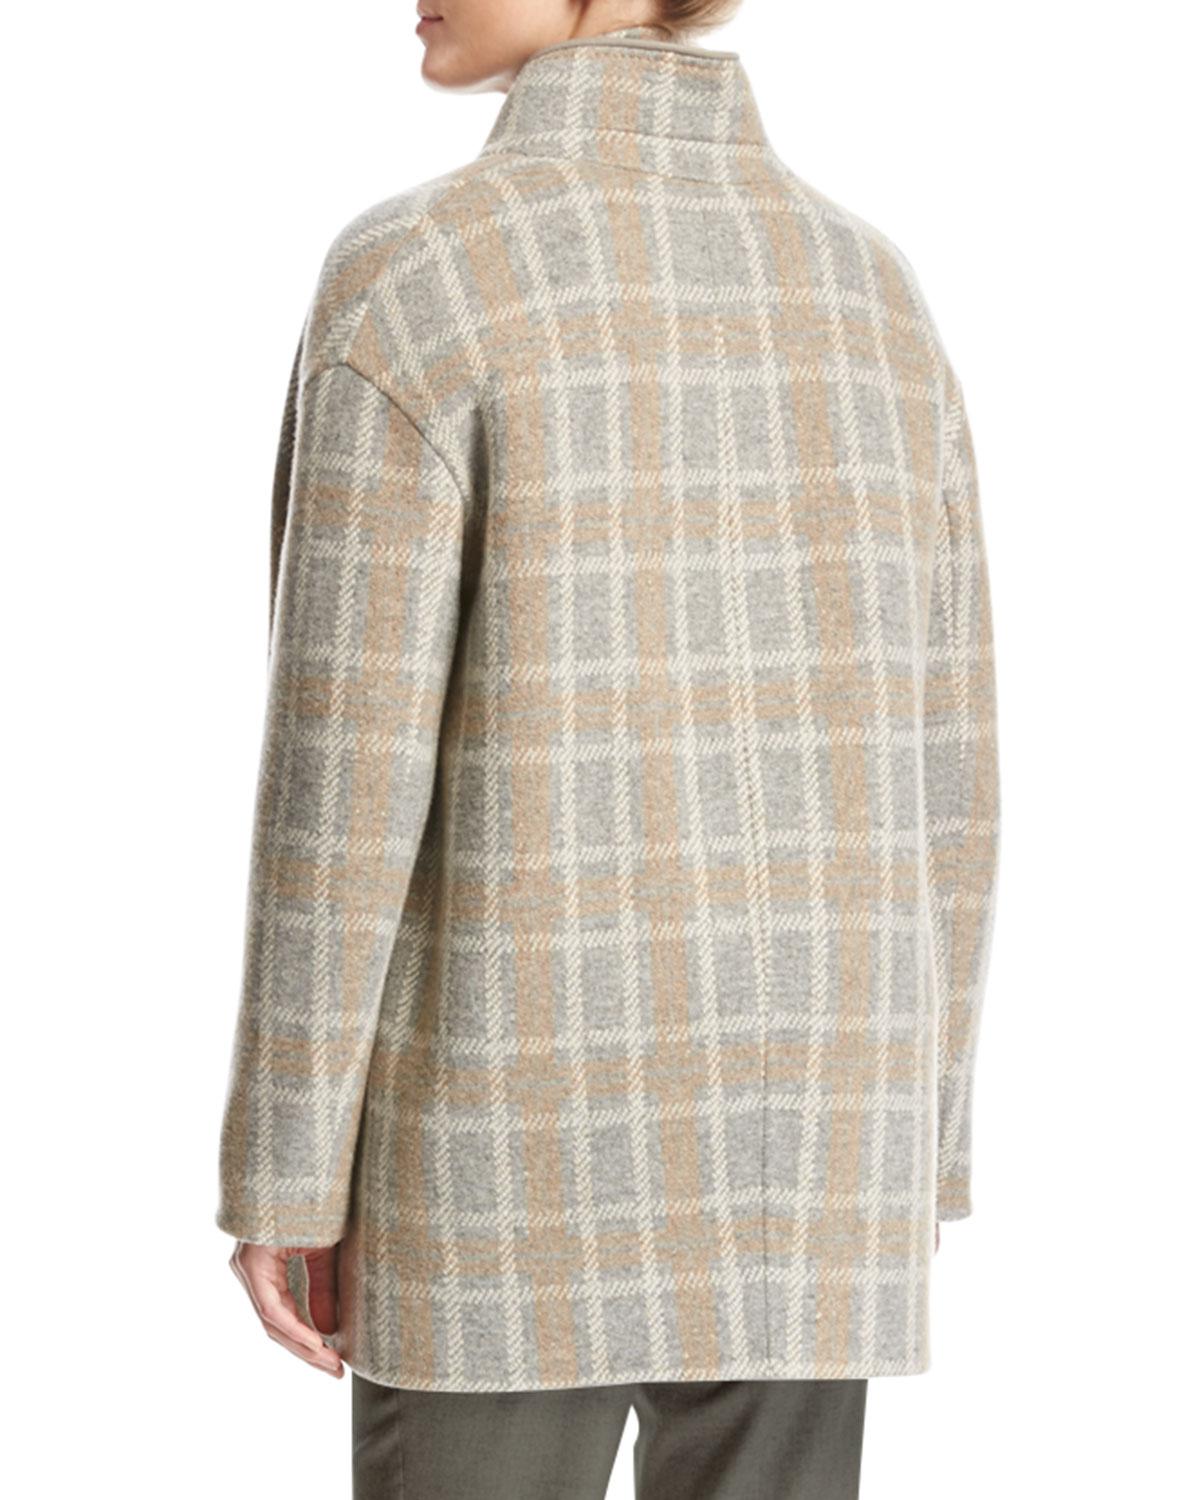 Lyst - Loro Piana Jimi Reversible Plaid Flannel Mélange Jacket in Natural